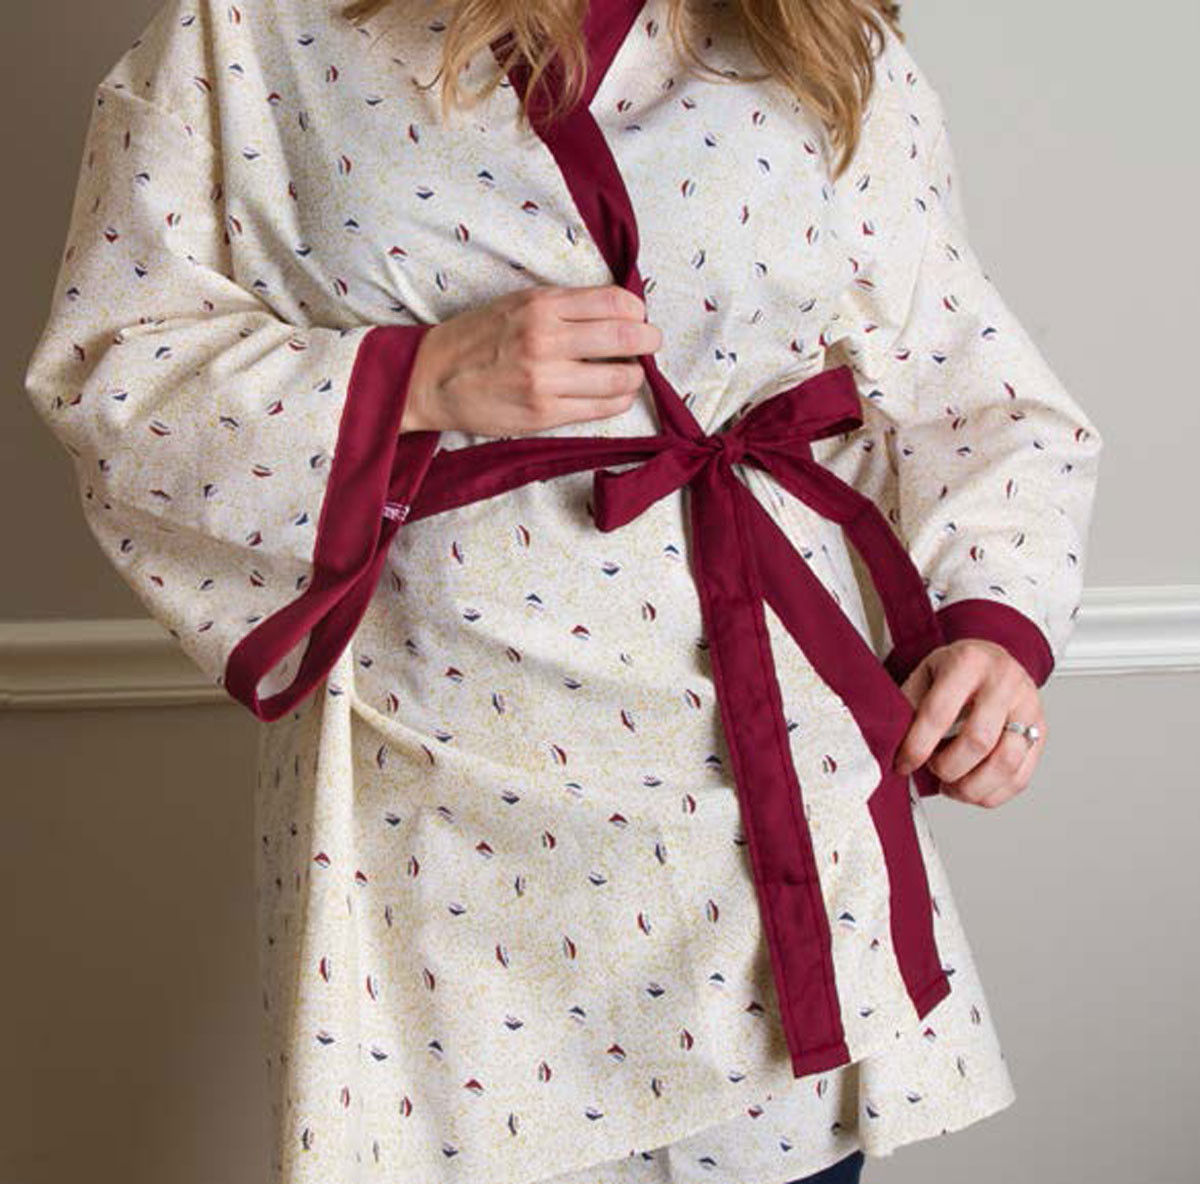 What extra features are included in these sponge print mammography gowns?